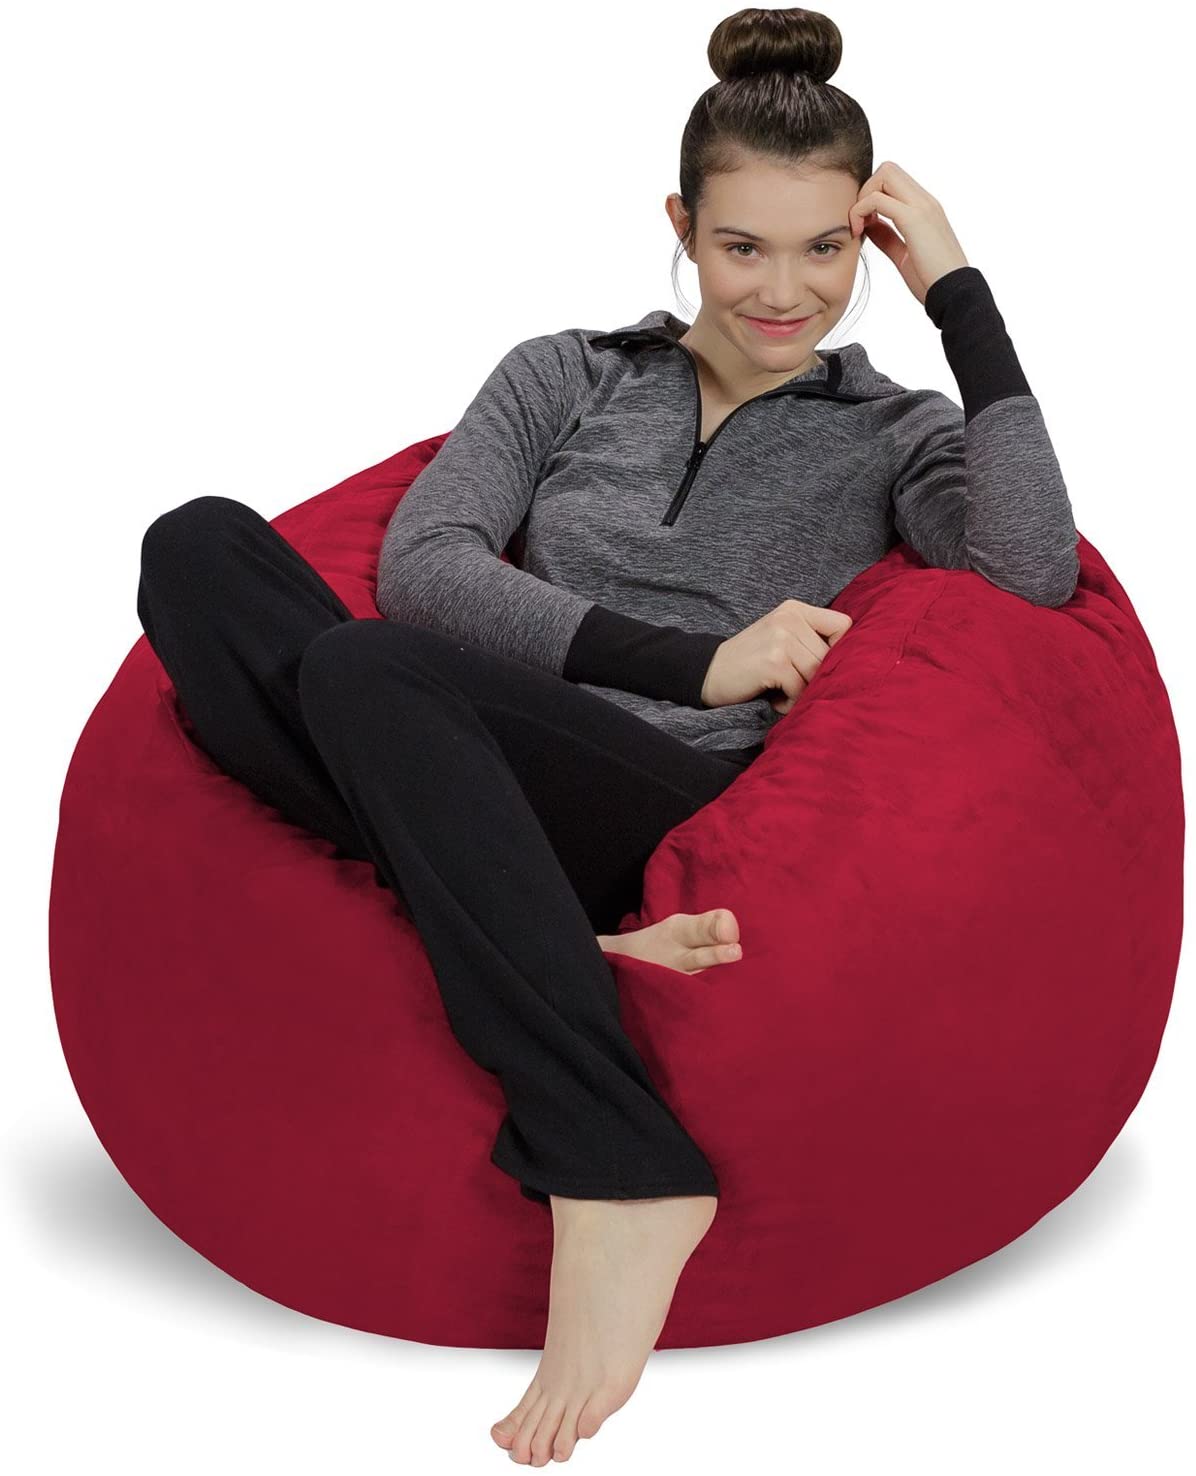 ULTIMATE SACK Kids Sack Bean Bag Chair: Giant Foam-Filled Furniture Double Stitched Seams Black, Suede Machine Washable Covers and 100% Virgin Foam Kids Bean Bag. Durable Inner Liner 